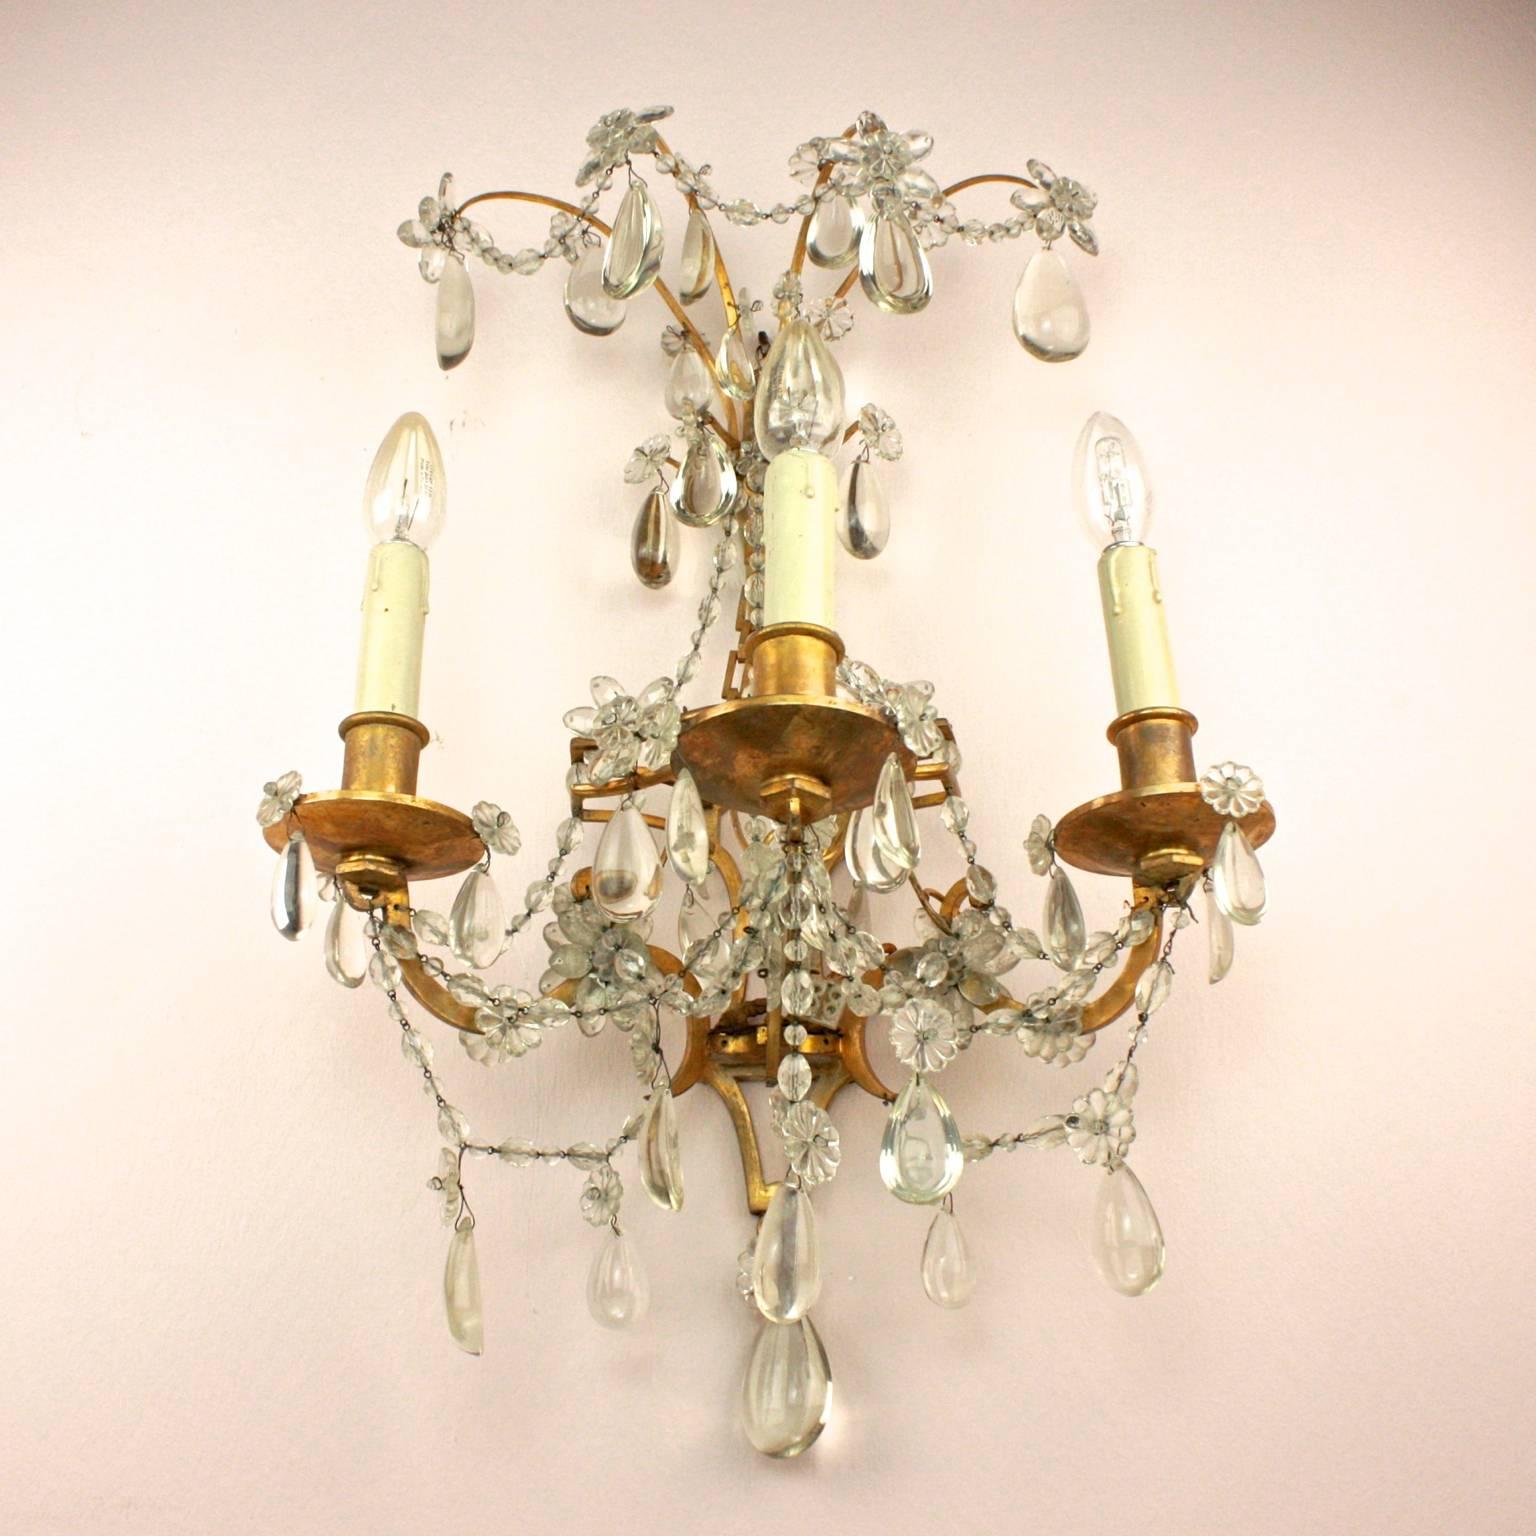 A pair of Regency style Maison Bagues three branch wall sconce or wall lights, each with splays of flowerheads on top, its back plate issuing three S-shaped candle arms hang with drops and beautifully arranged crystal flowers.

Since its